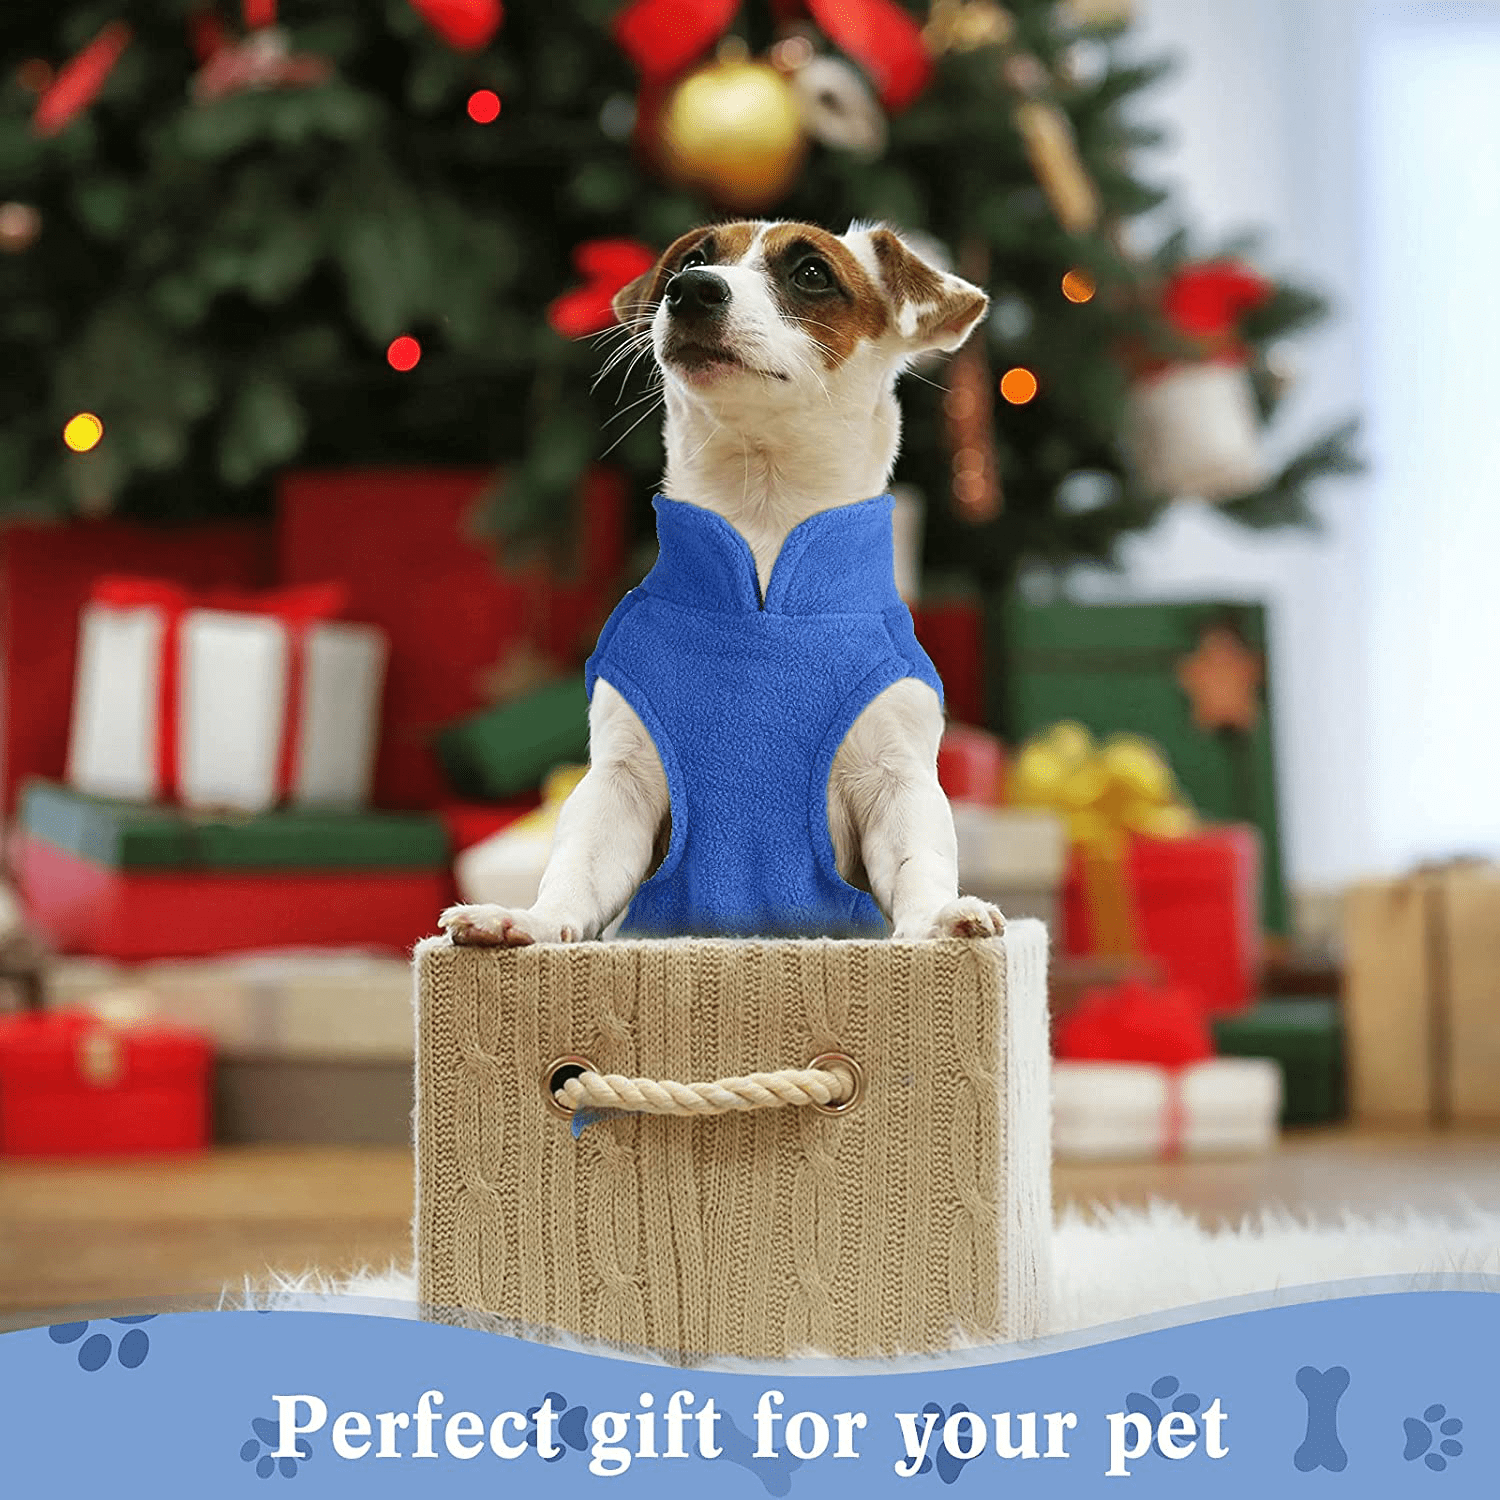 6 Pieces Dog Clothes Dog Sweater with Leash Ring Soft Winter Pet Clothes Warm Dog Sweatshirt PET Fleece Sweater Vest Dog Cozy Jacket for Dogs Supplies